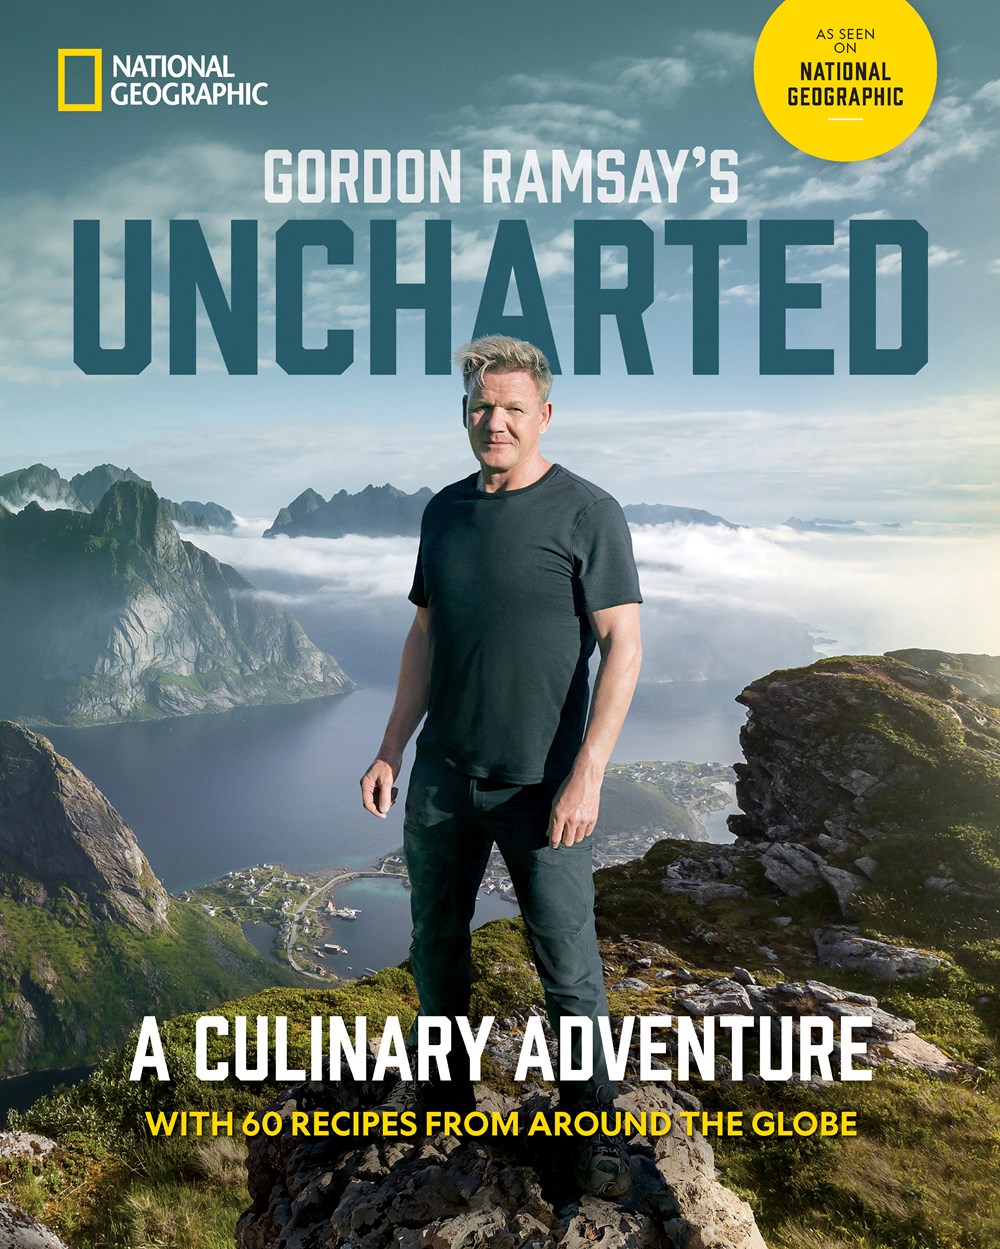 Gordon Ramsay’s Uncharted: A Culinary Adventure with 60 Recipes from Around the Globe